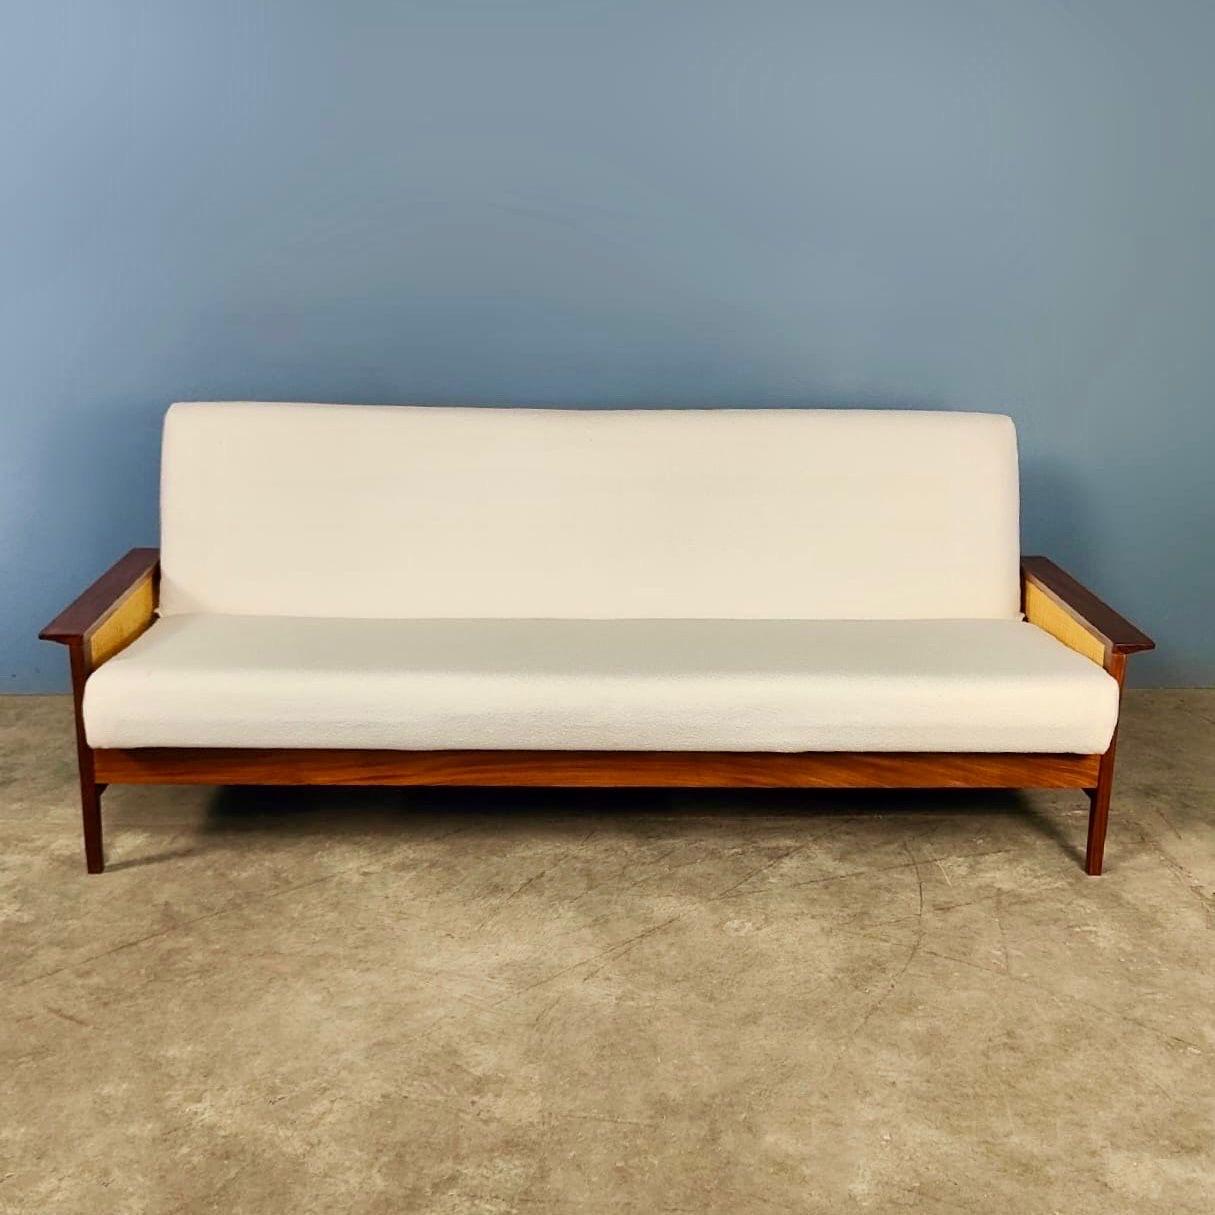 New Stock ✅

1960s G Plan Group 3 Three Seater Sofa Bed Designed by Richard Young of Merrow Associates

Produced by G Plan and designed by Richard Young in the early 1960s, a beautiful and highly practical three seater sofa which folds down to